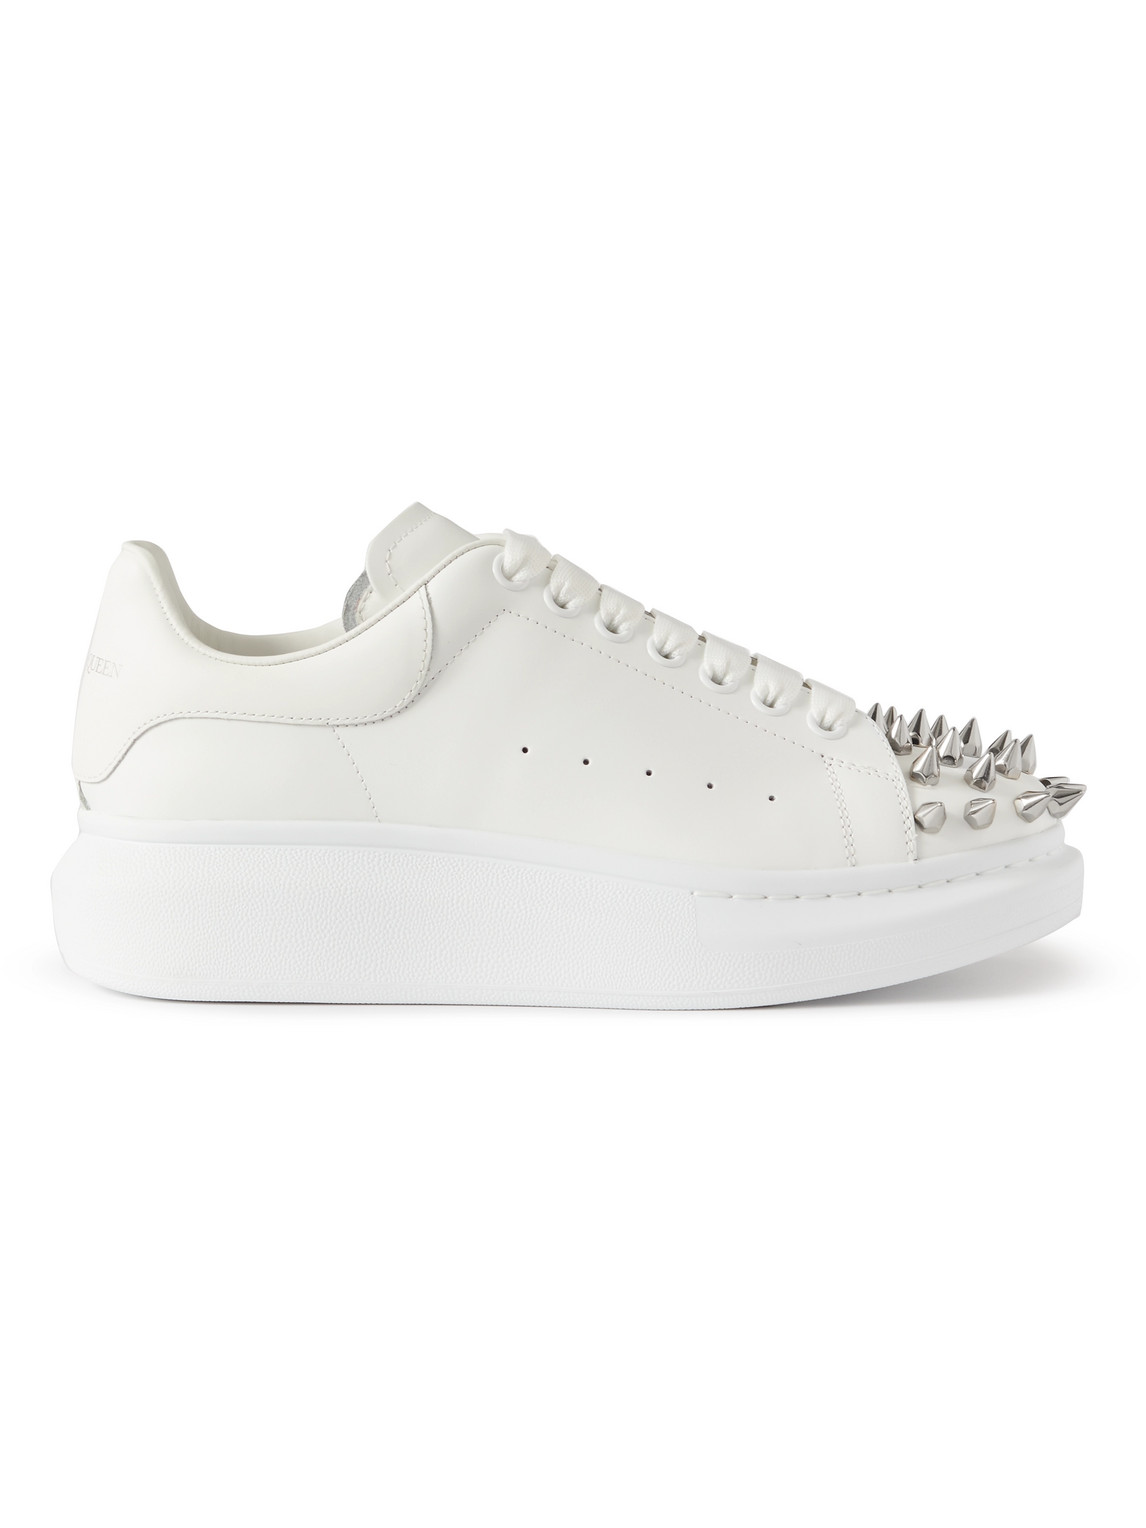 Alexander McQueen Exaggerated-Sole Spiked Leather Sneakers